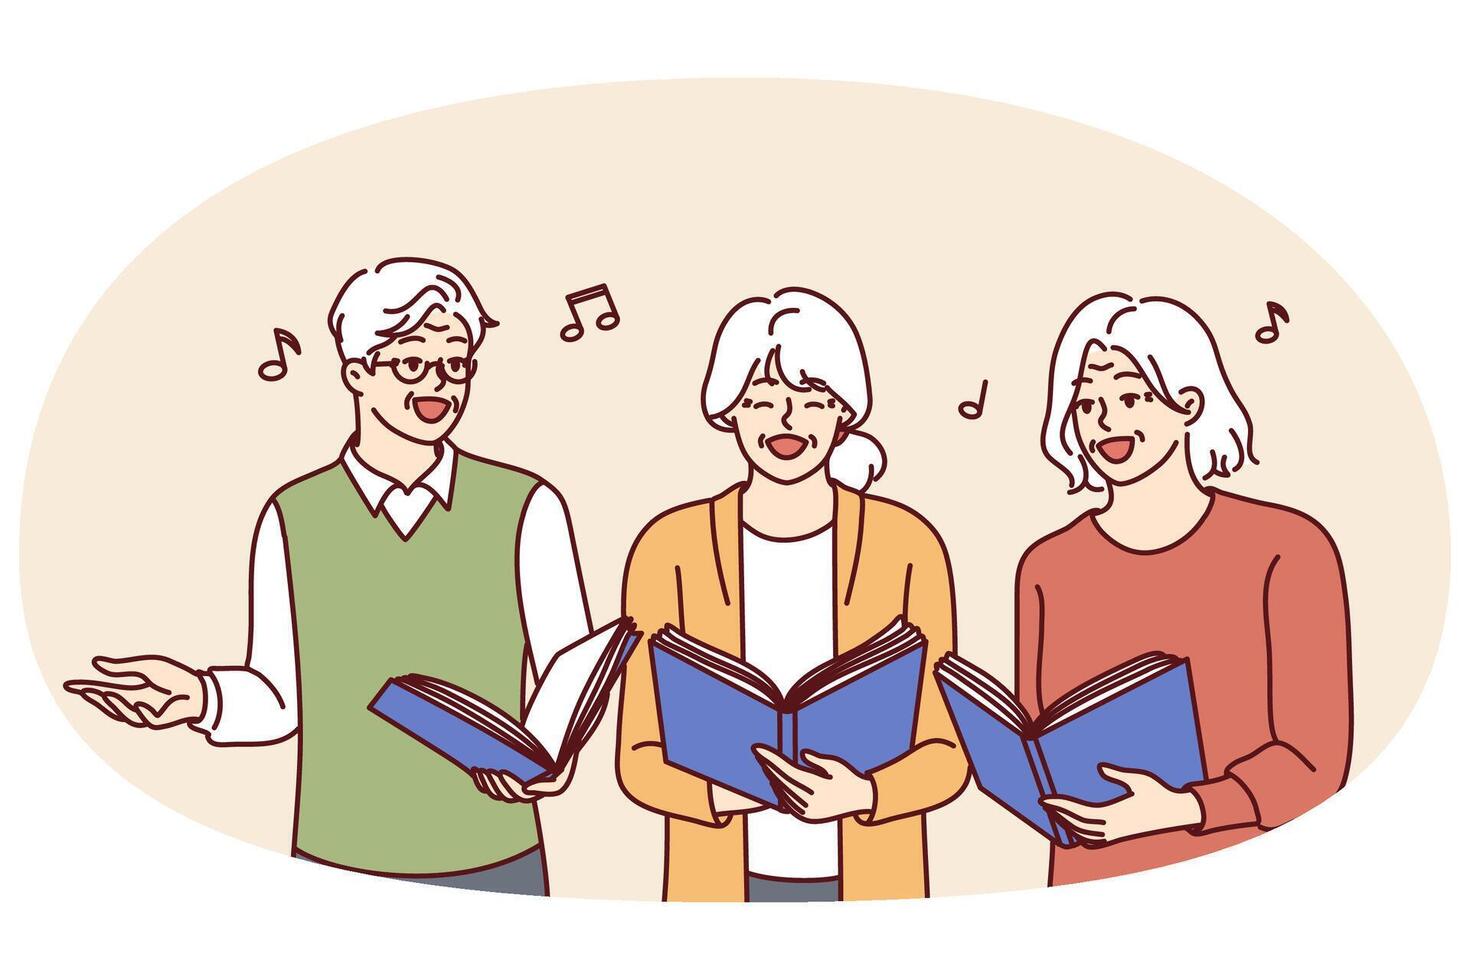 Chorus elderly men and women with workbooks in hands singing song together and enjoying old age vector